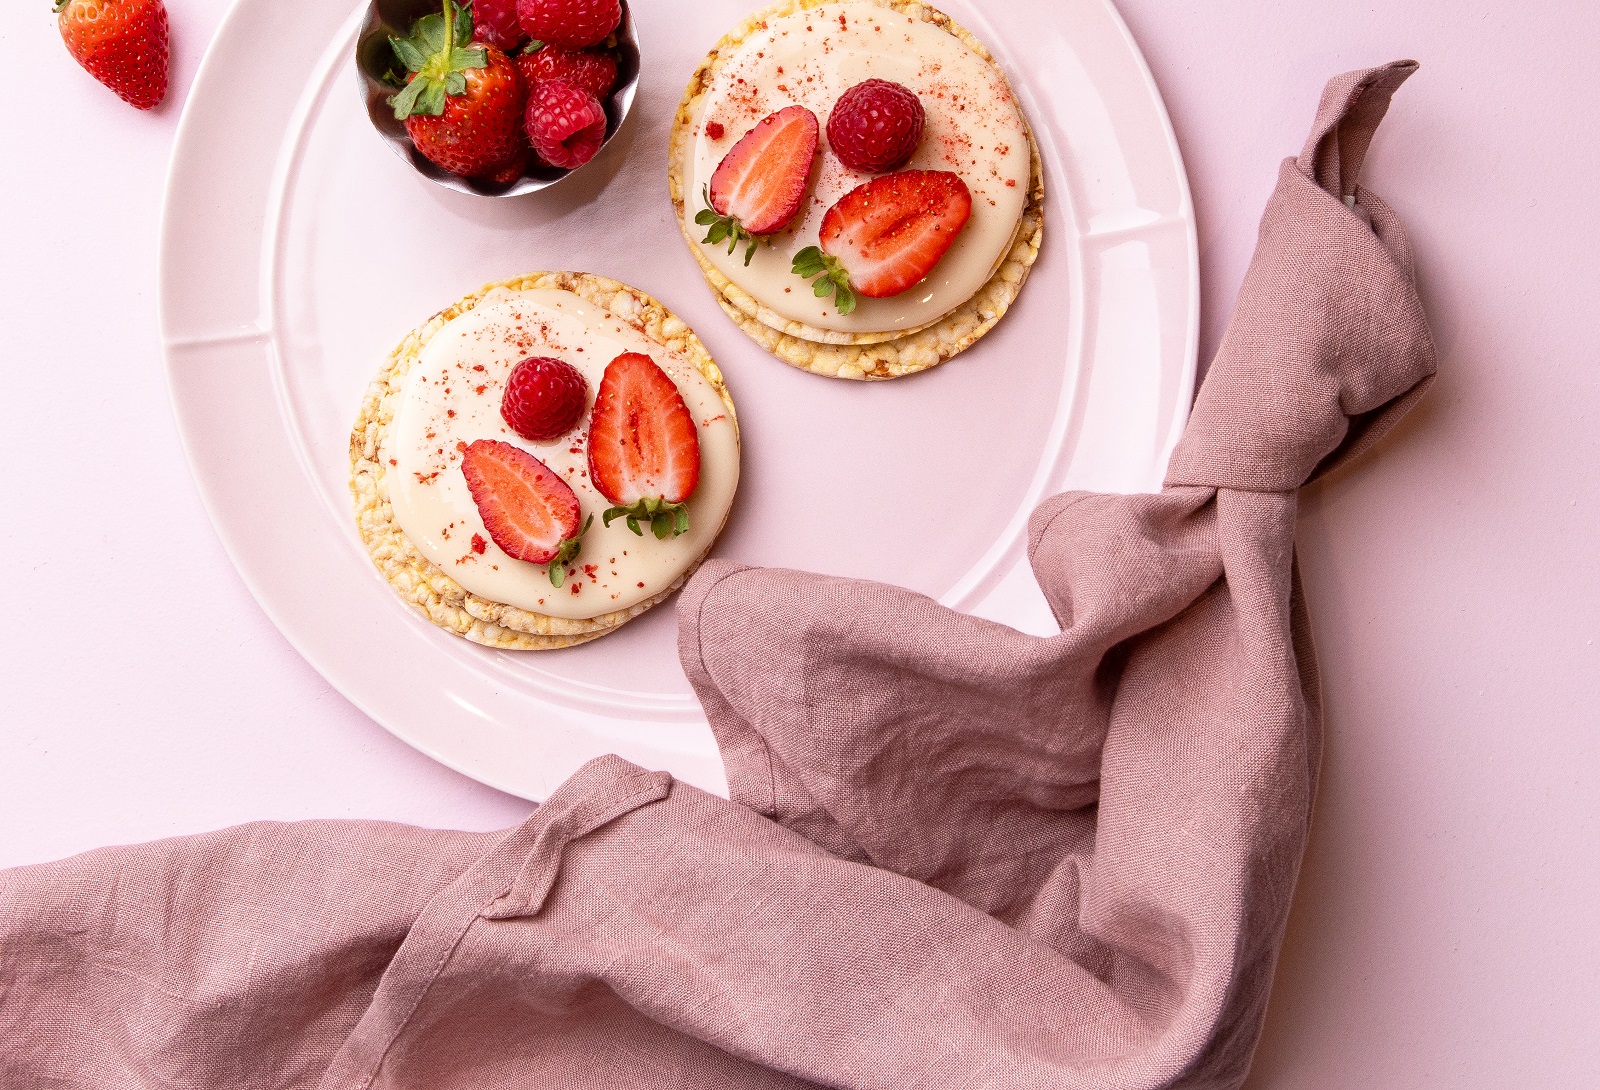 White Chocolate & Strawberries on CORN THINS slices as a decadent treat 